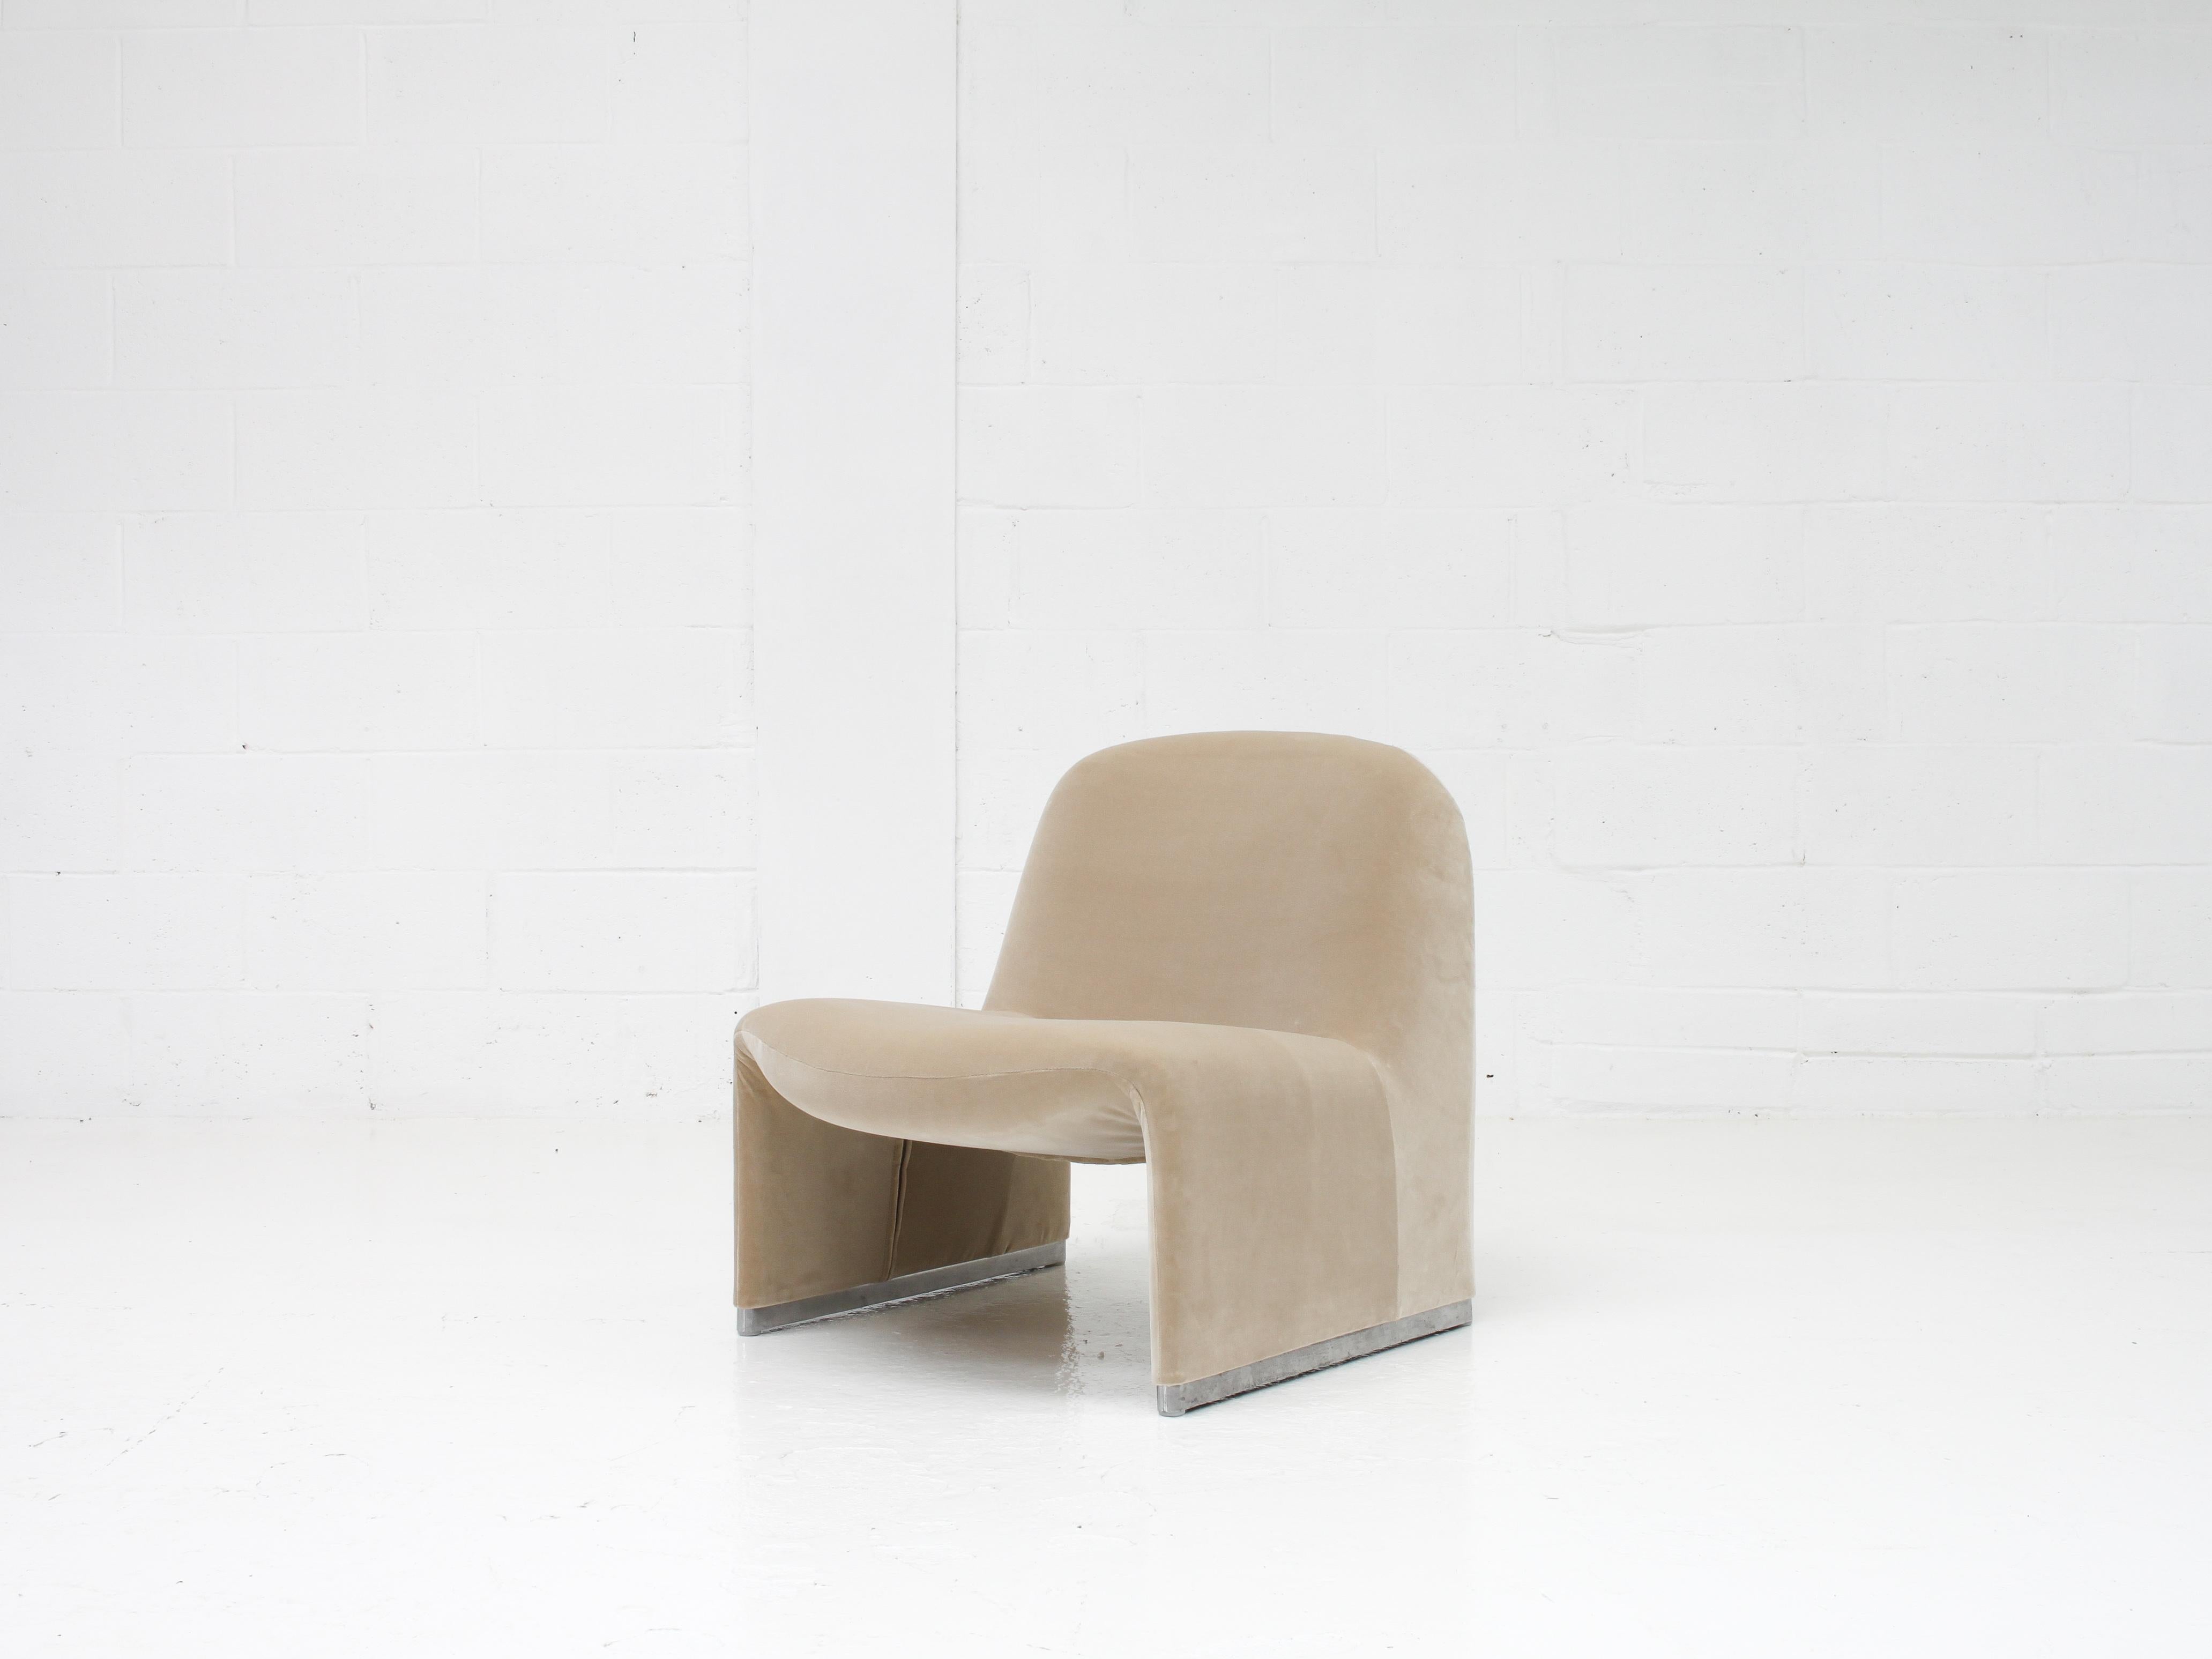 A single Giancarlo Piretti “Alky” chair newly upholstered in Designers Guild linen colored cotton velvet. 

Manufactured by Artifort in the 1970s.

The organic shape offers a minimal appearance but also comfort.

Foam restored where required